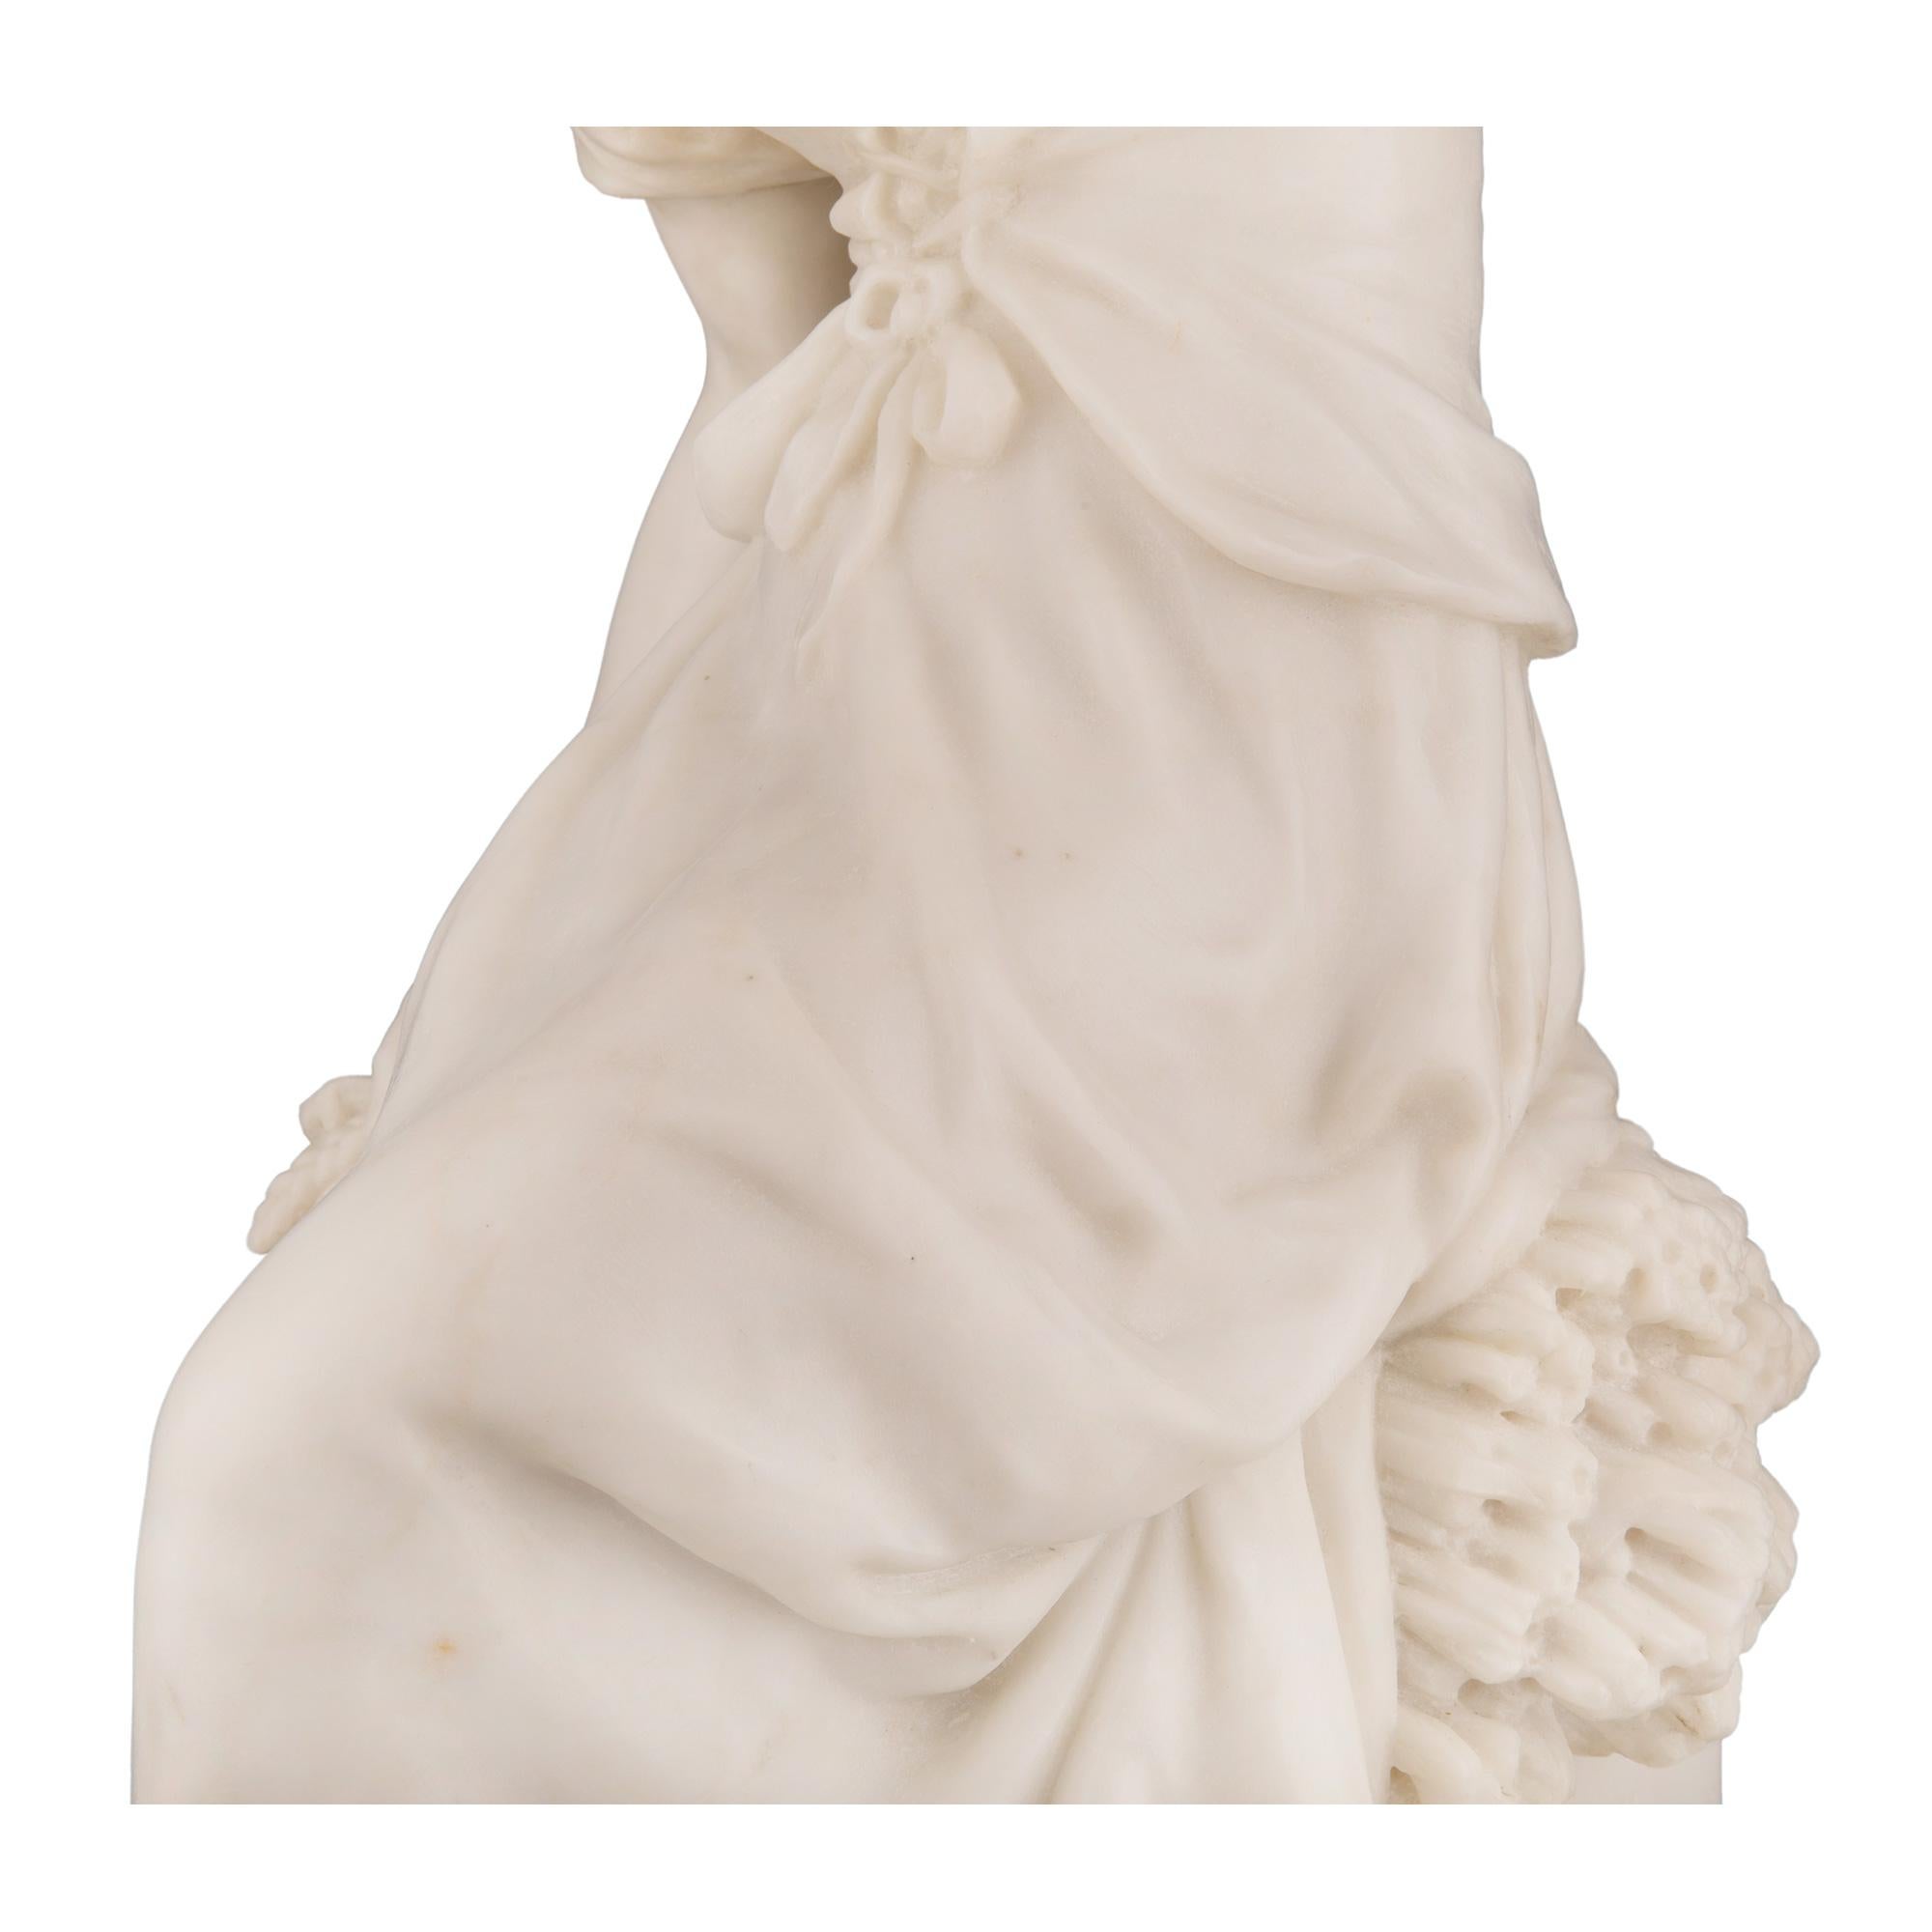 French 19th Century White Carrara Marble Statue of a Maiden, Signed Moreau For Sale 3